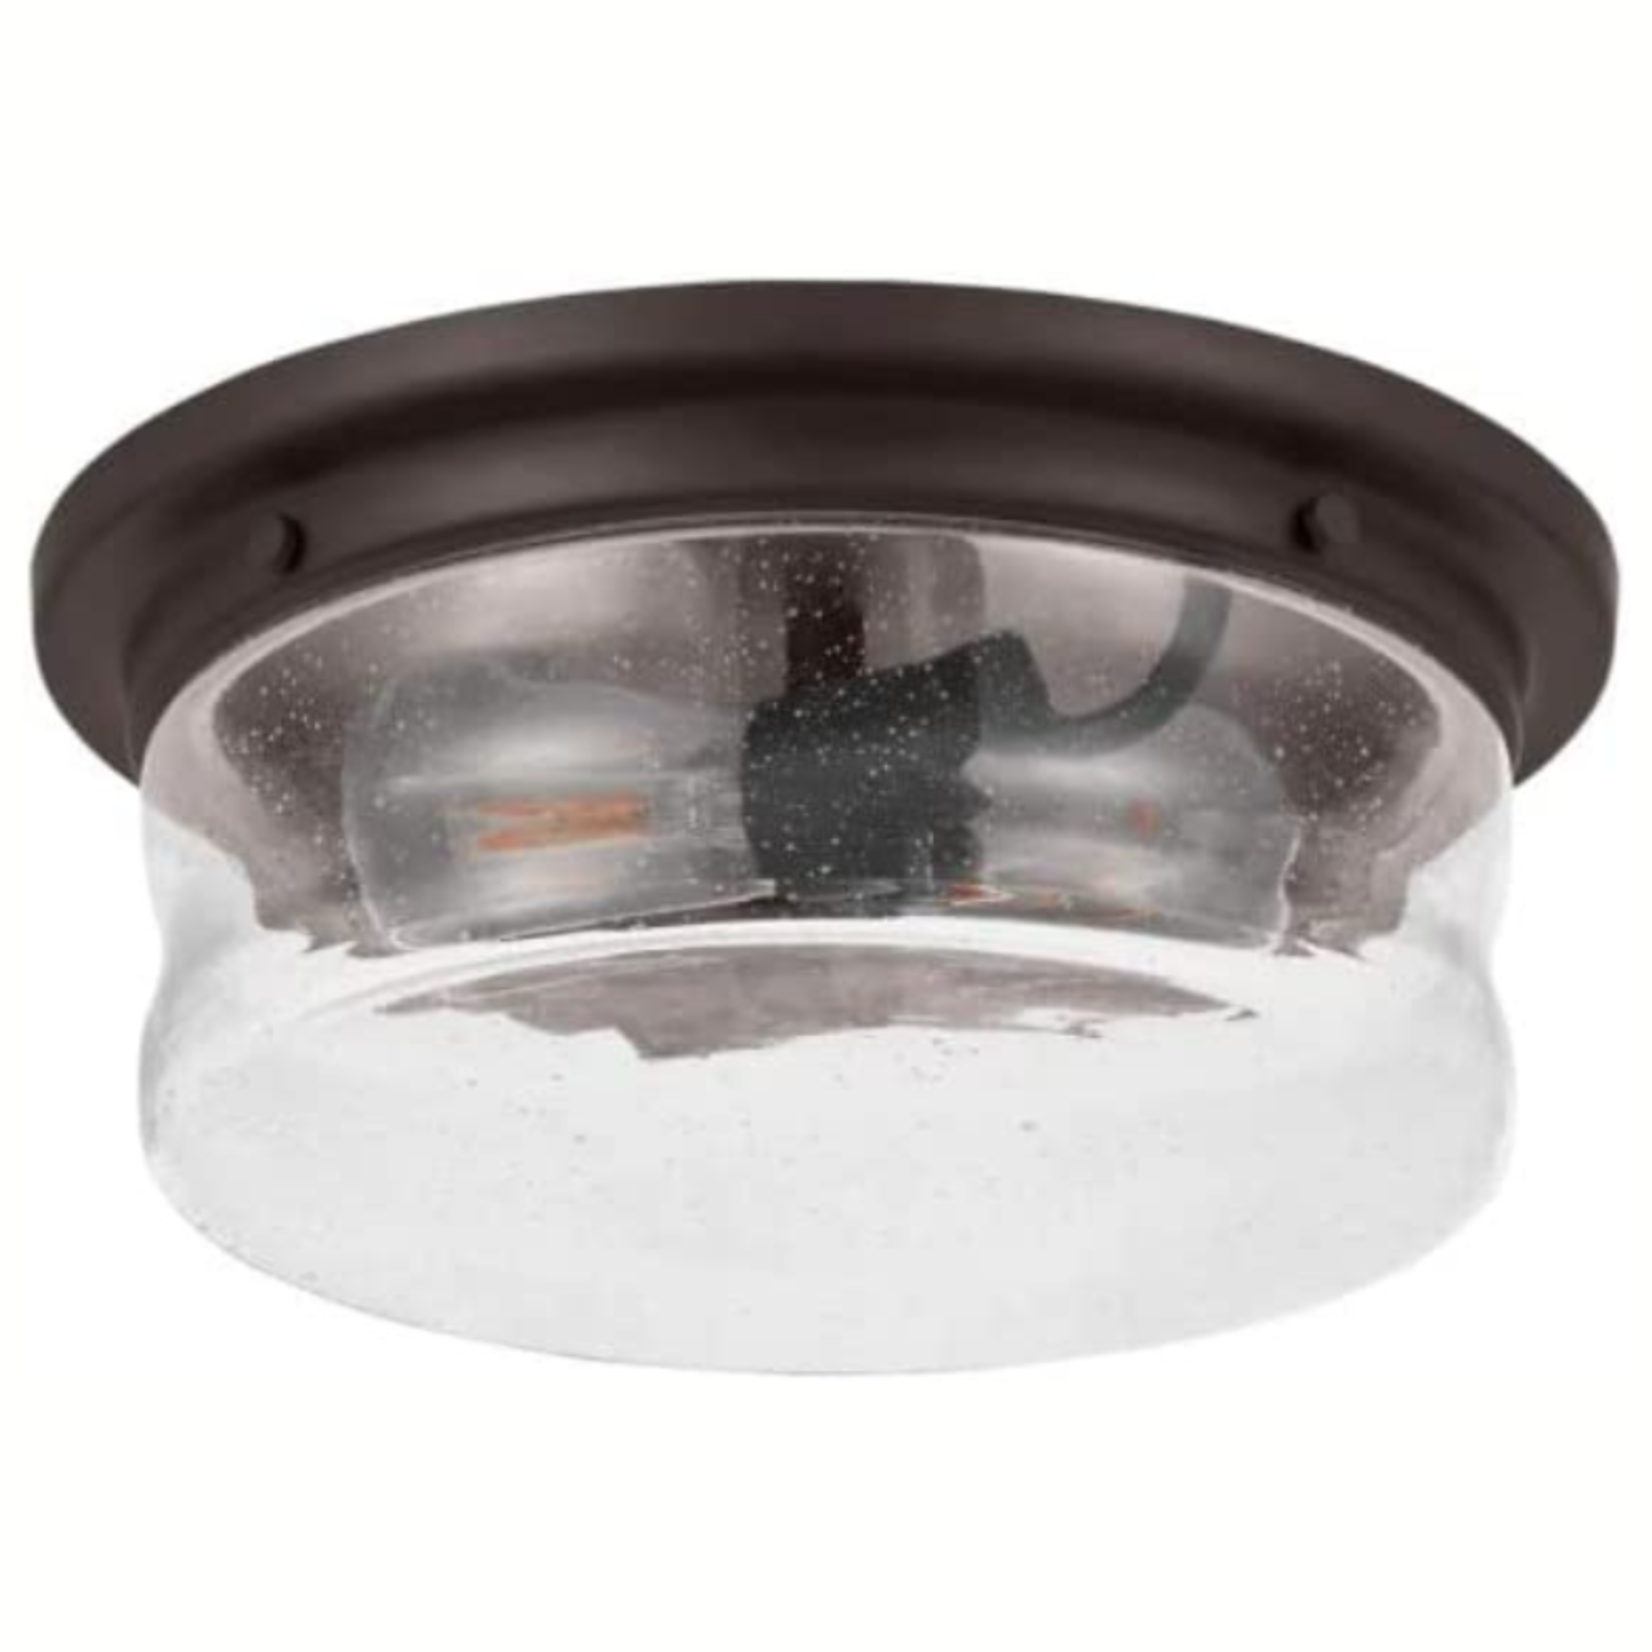 Generic Flush Mount Ceiling Light- 13 Inch Round- Oil Rubbed Bronze